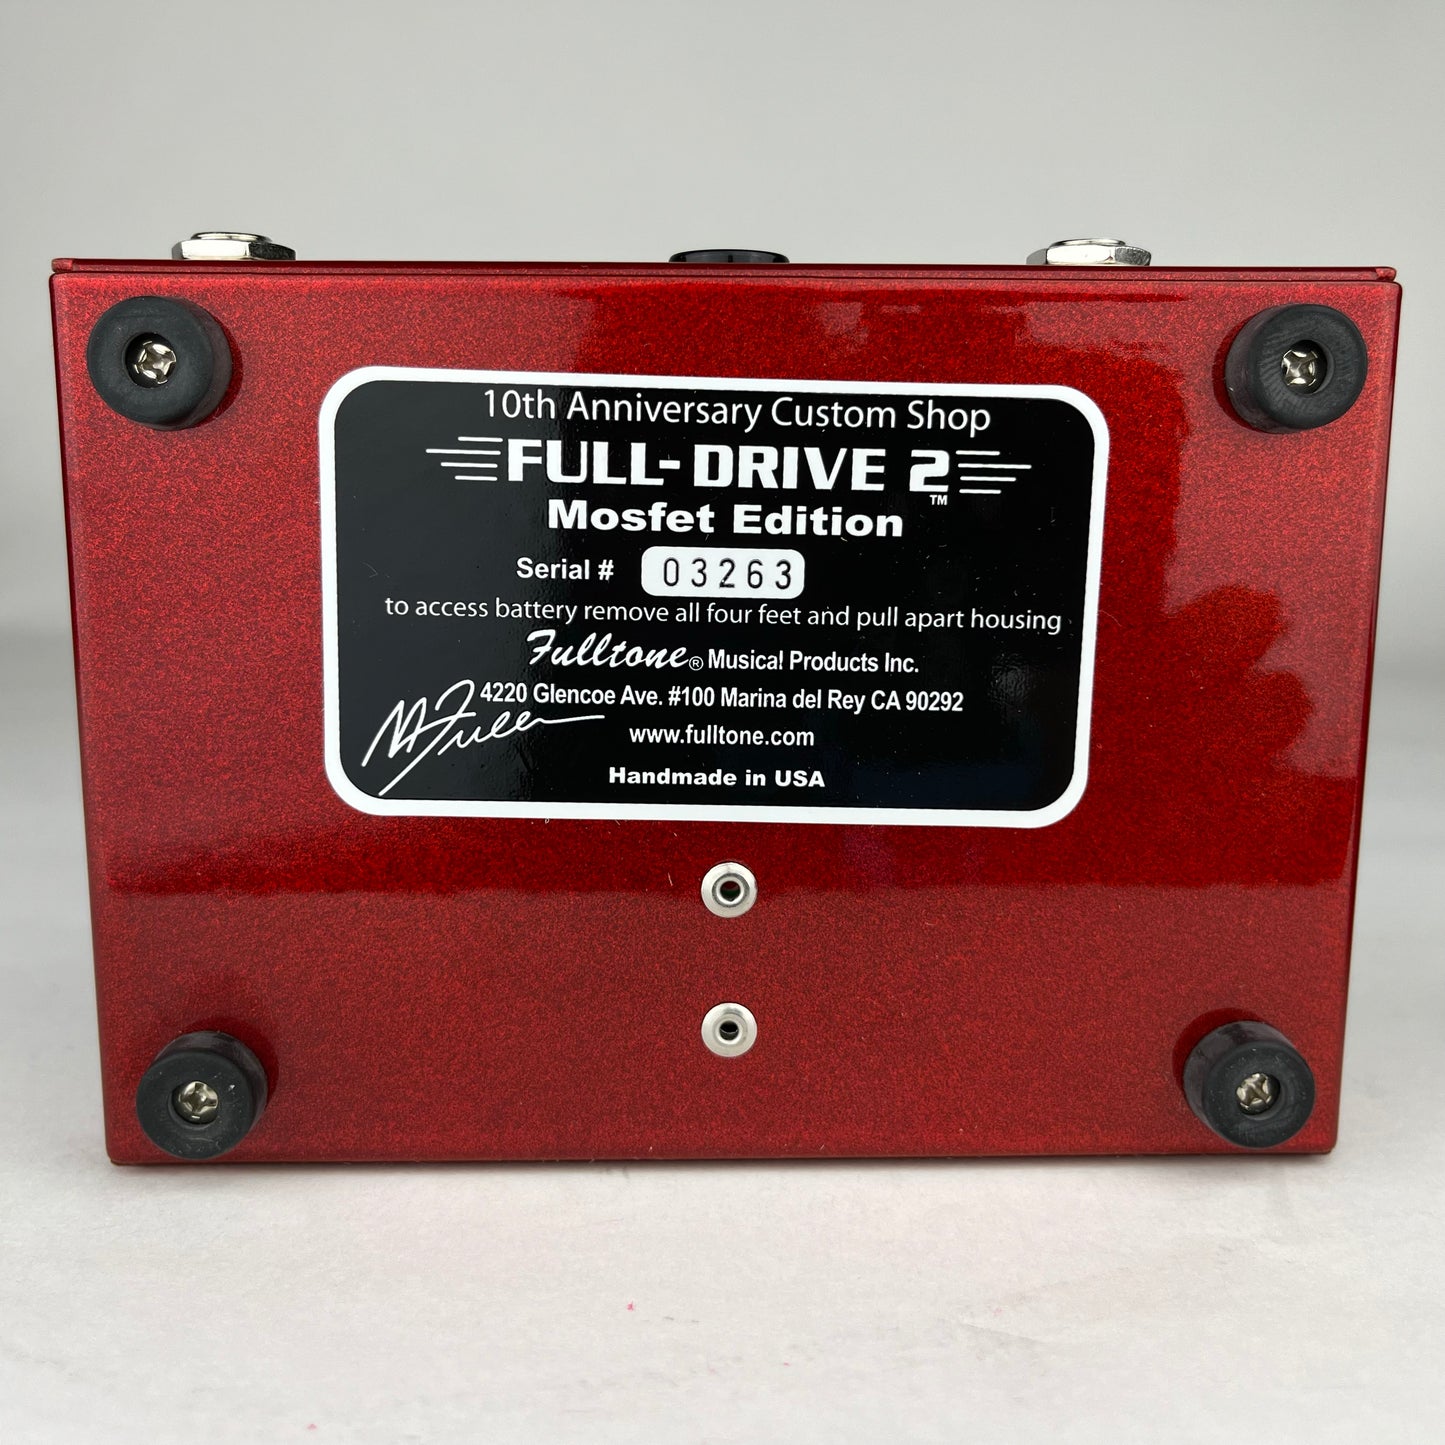 Fulltone Full-Drive 2 10th Anniversary MOSFET, Brand New Old Stock (NOS)